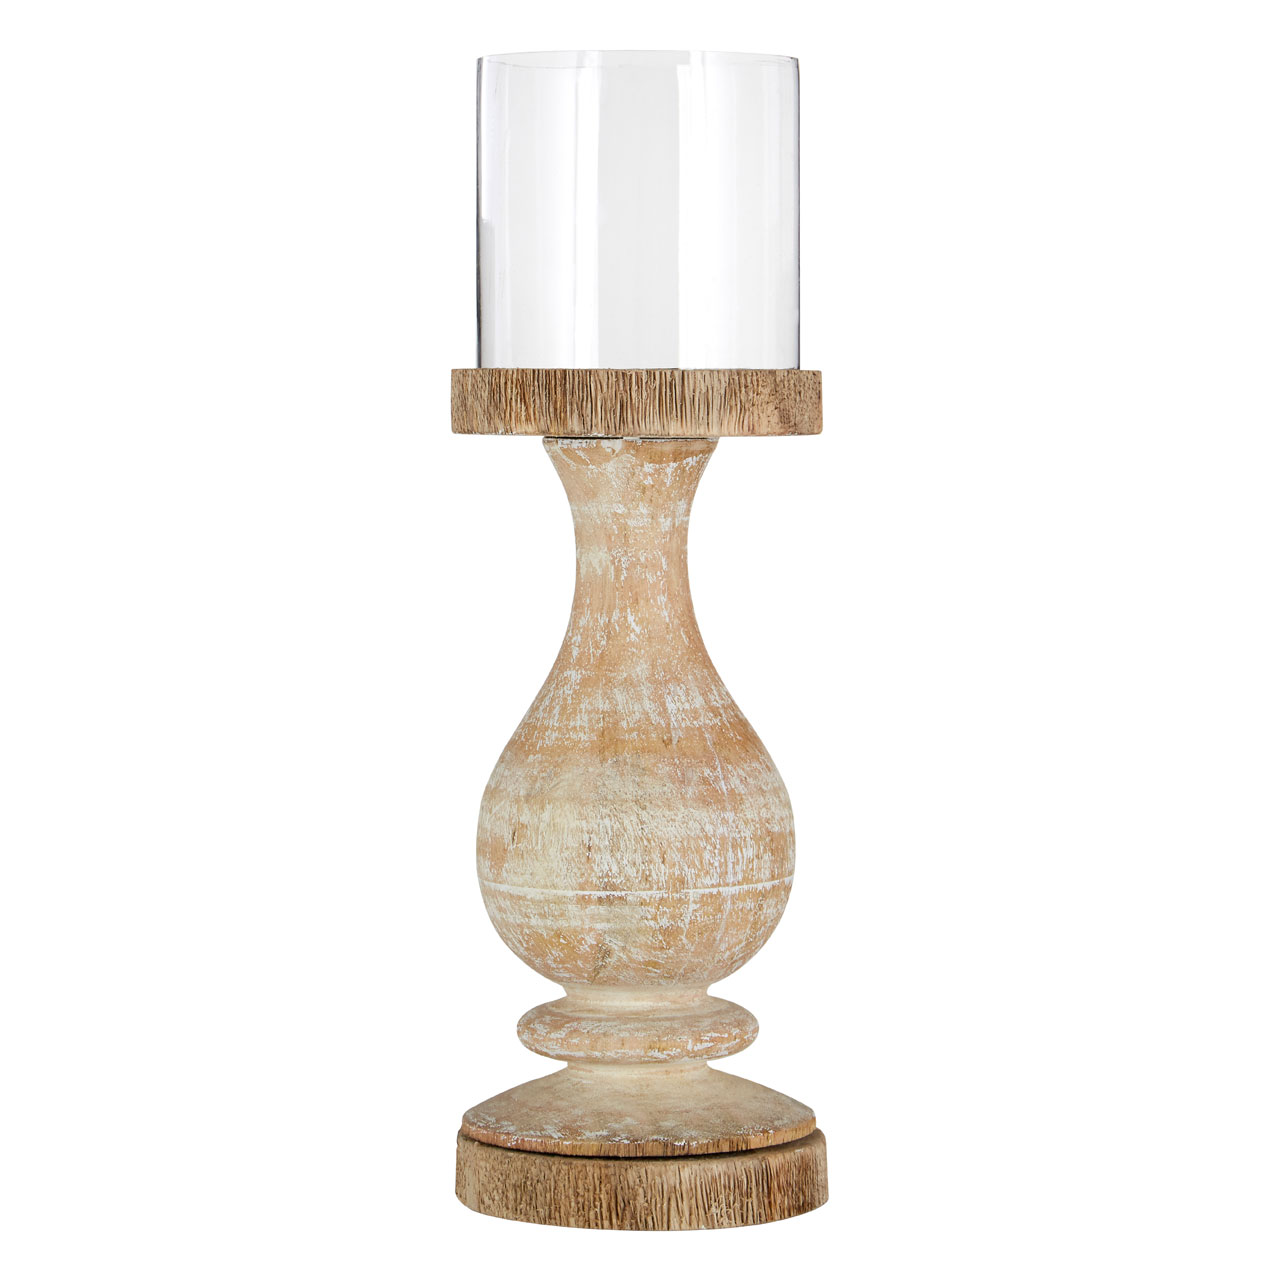 Prime Furnishing Complements Wooden Pillar Candle Holder